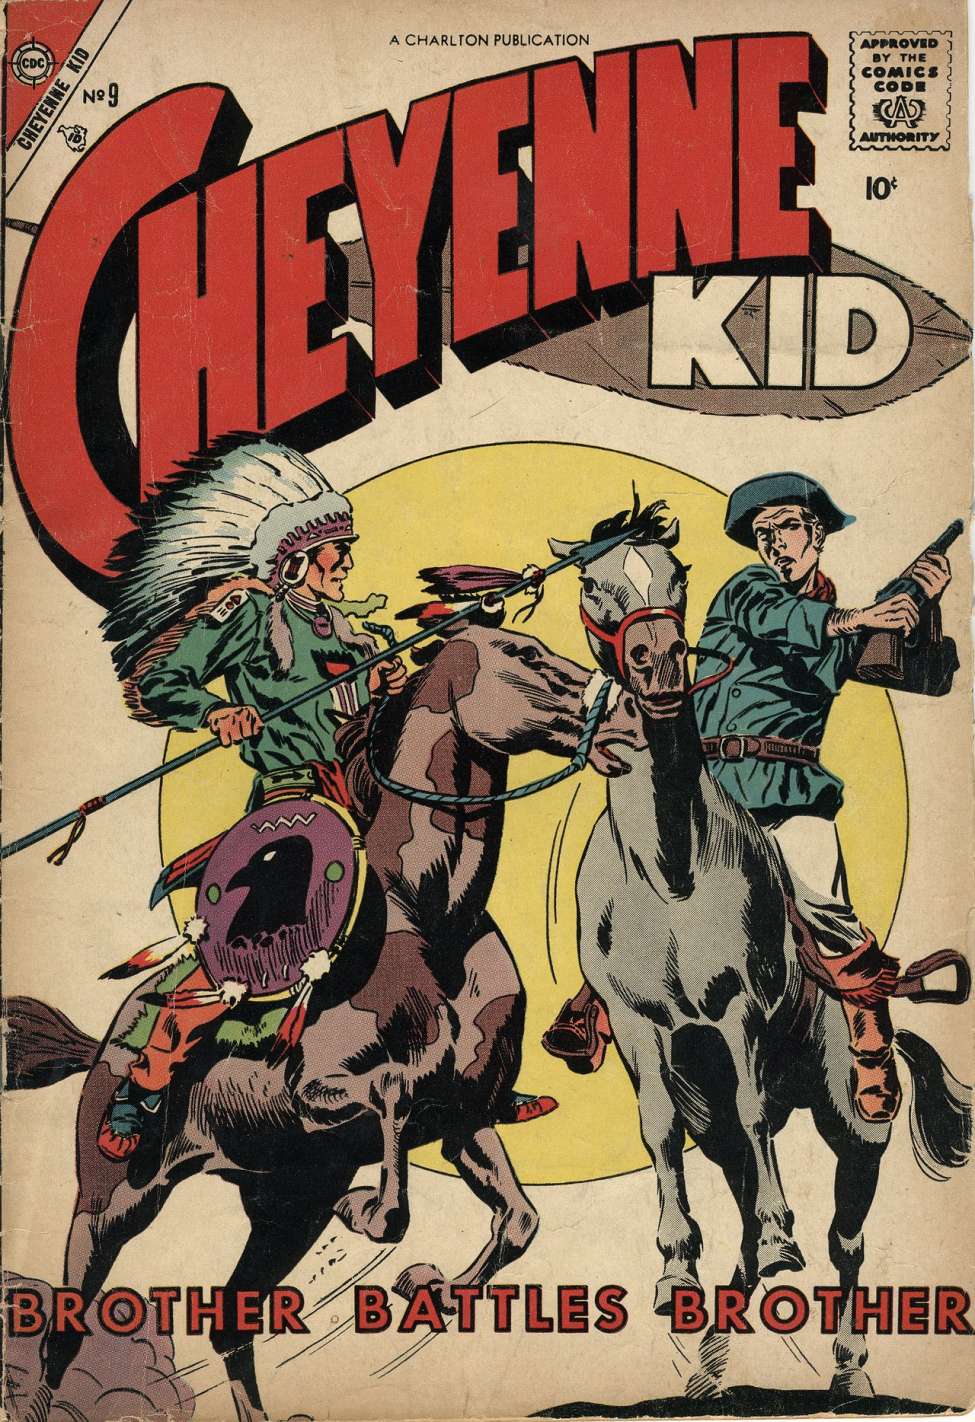 Book Cover For Cheyenne Kid 9